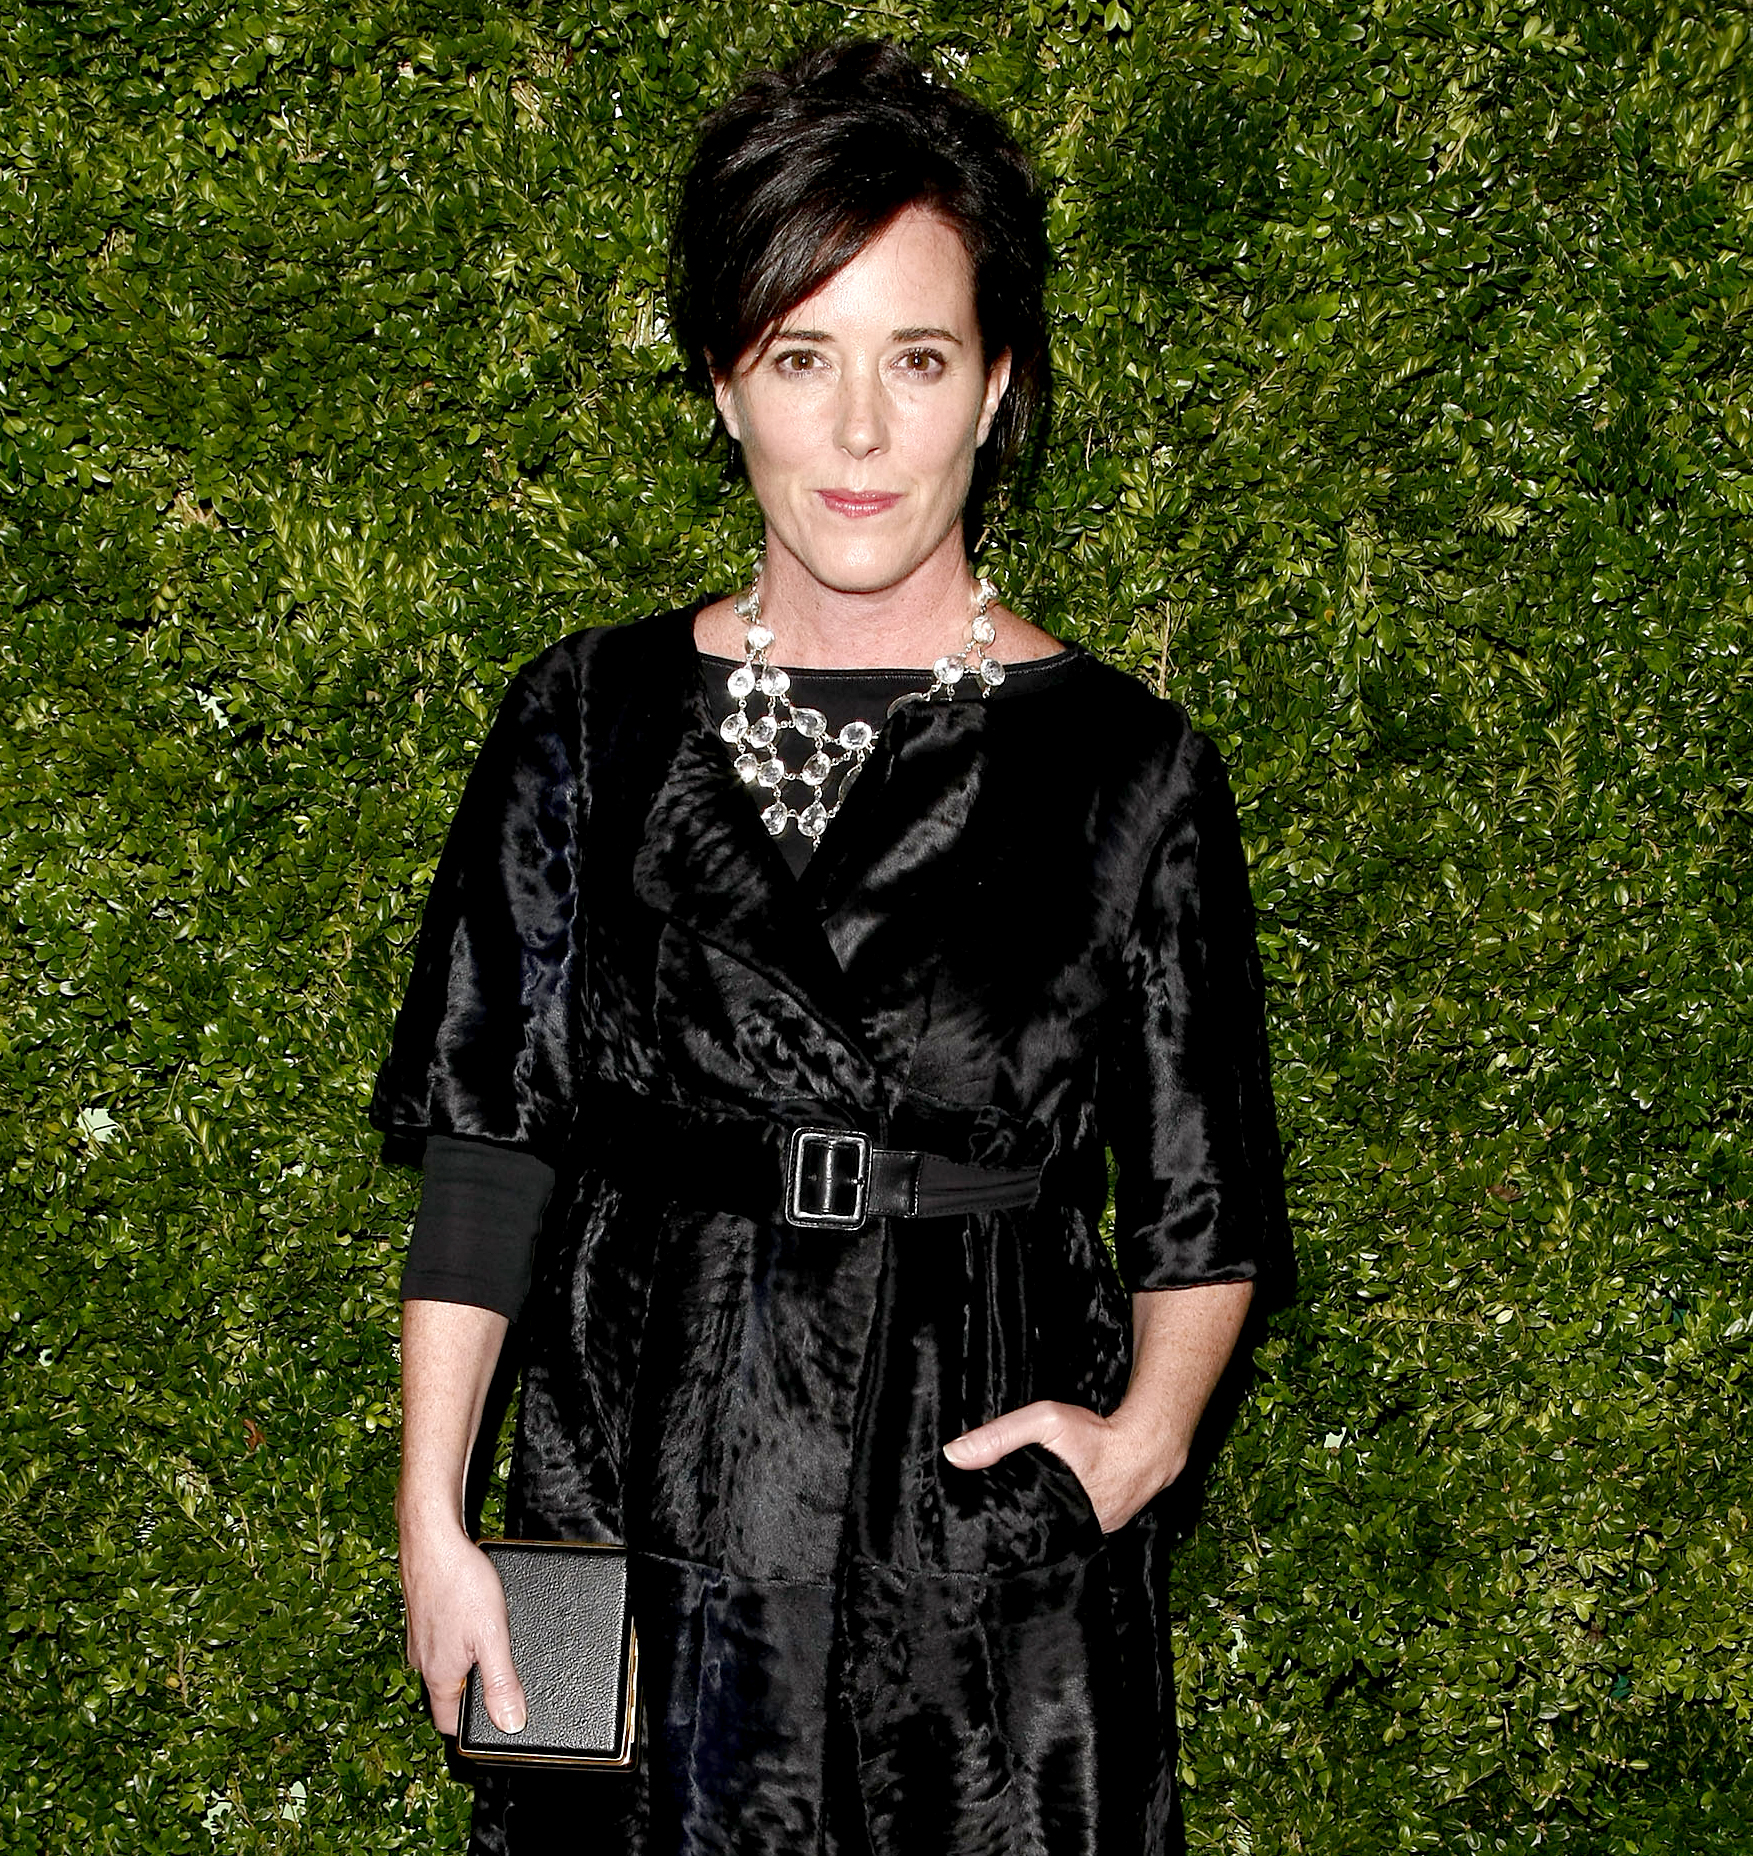 Kate Spade Dead: Fashion Designer Dies at 55 From Apparent Suicide